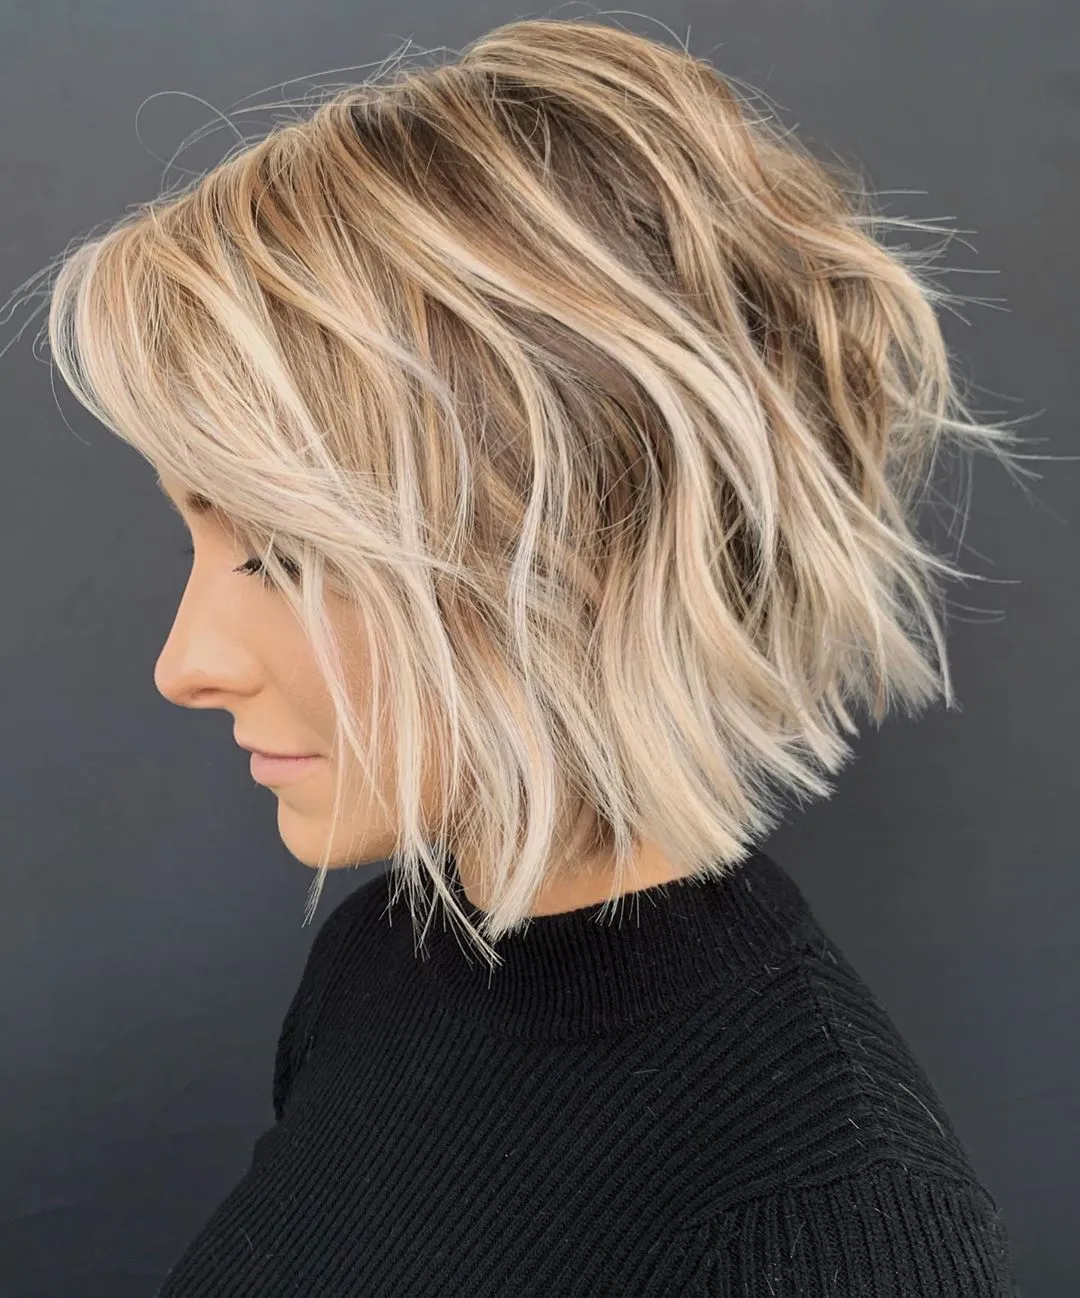 Trending Haircuts and Hairstyles